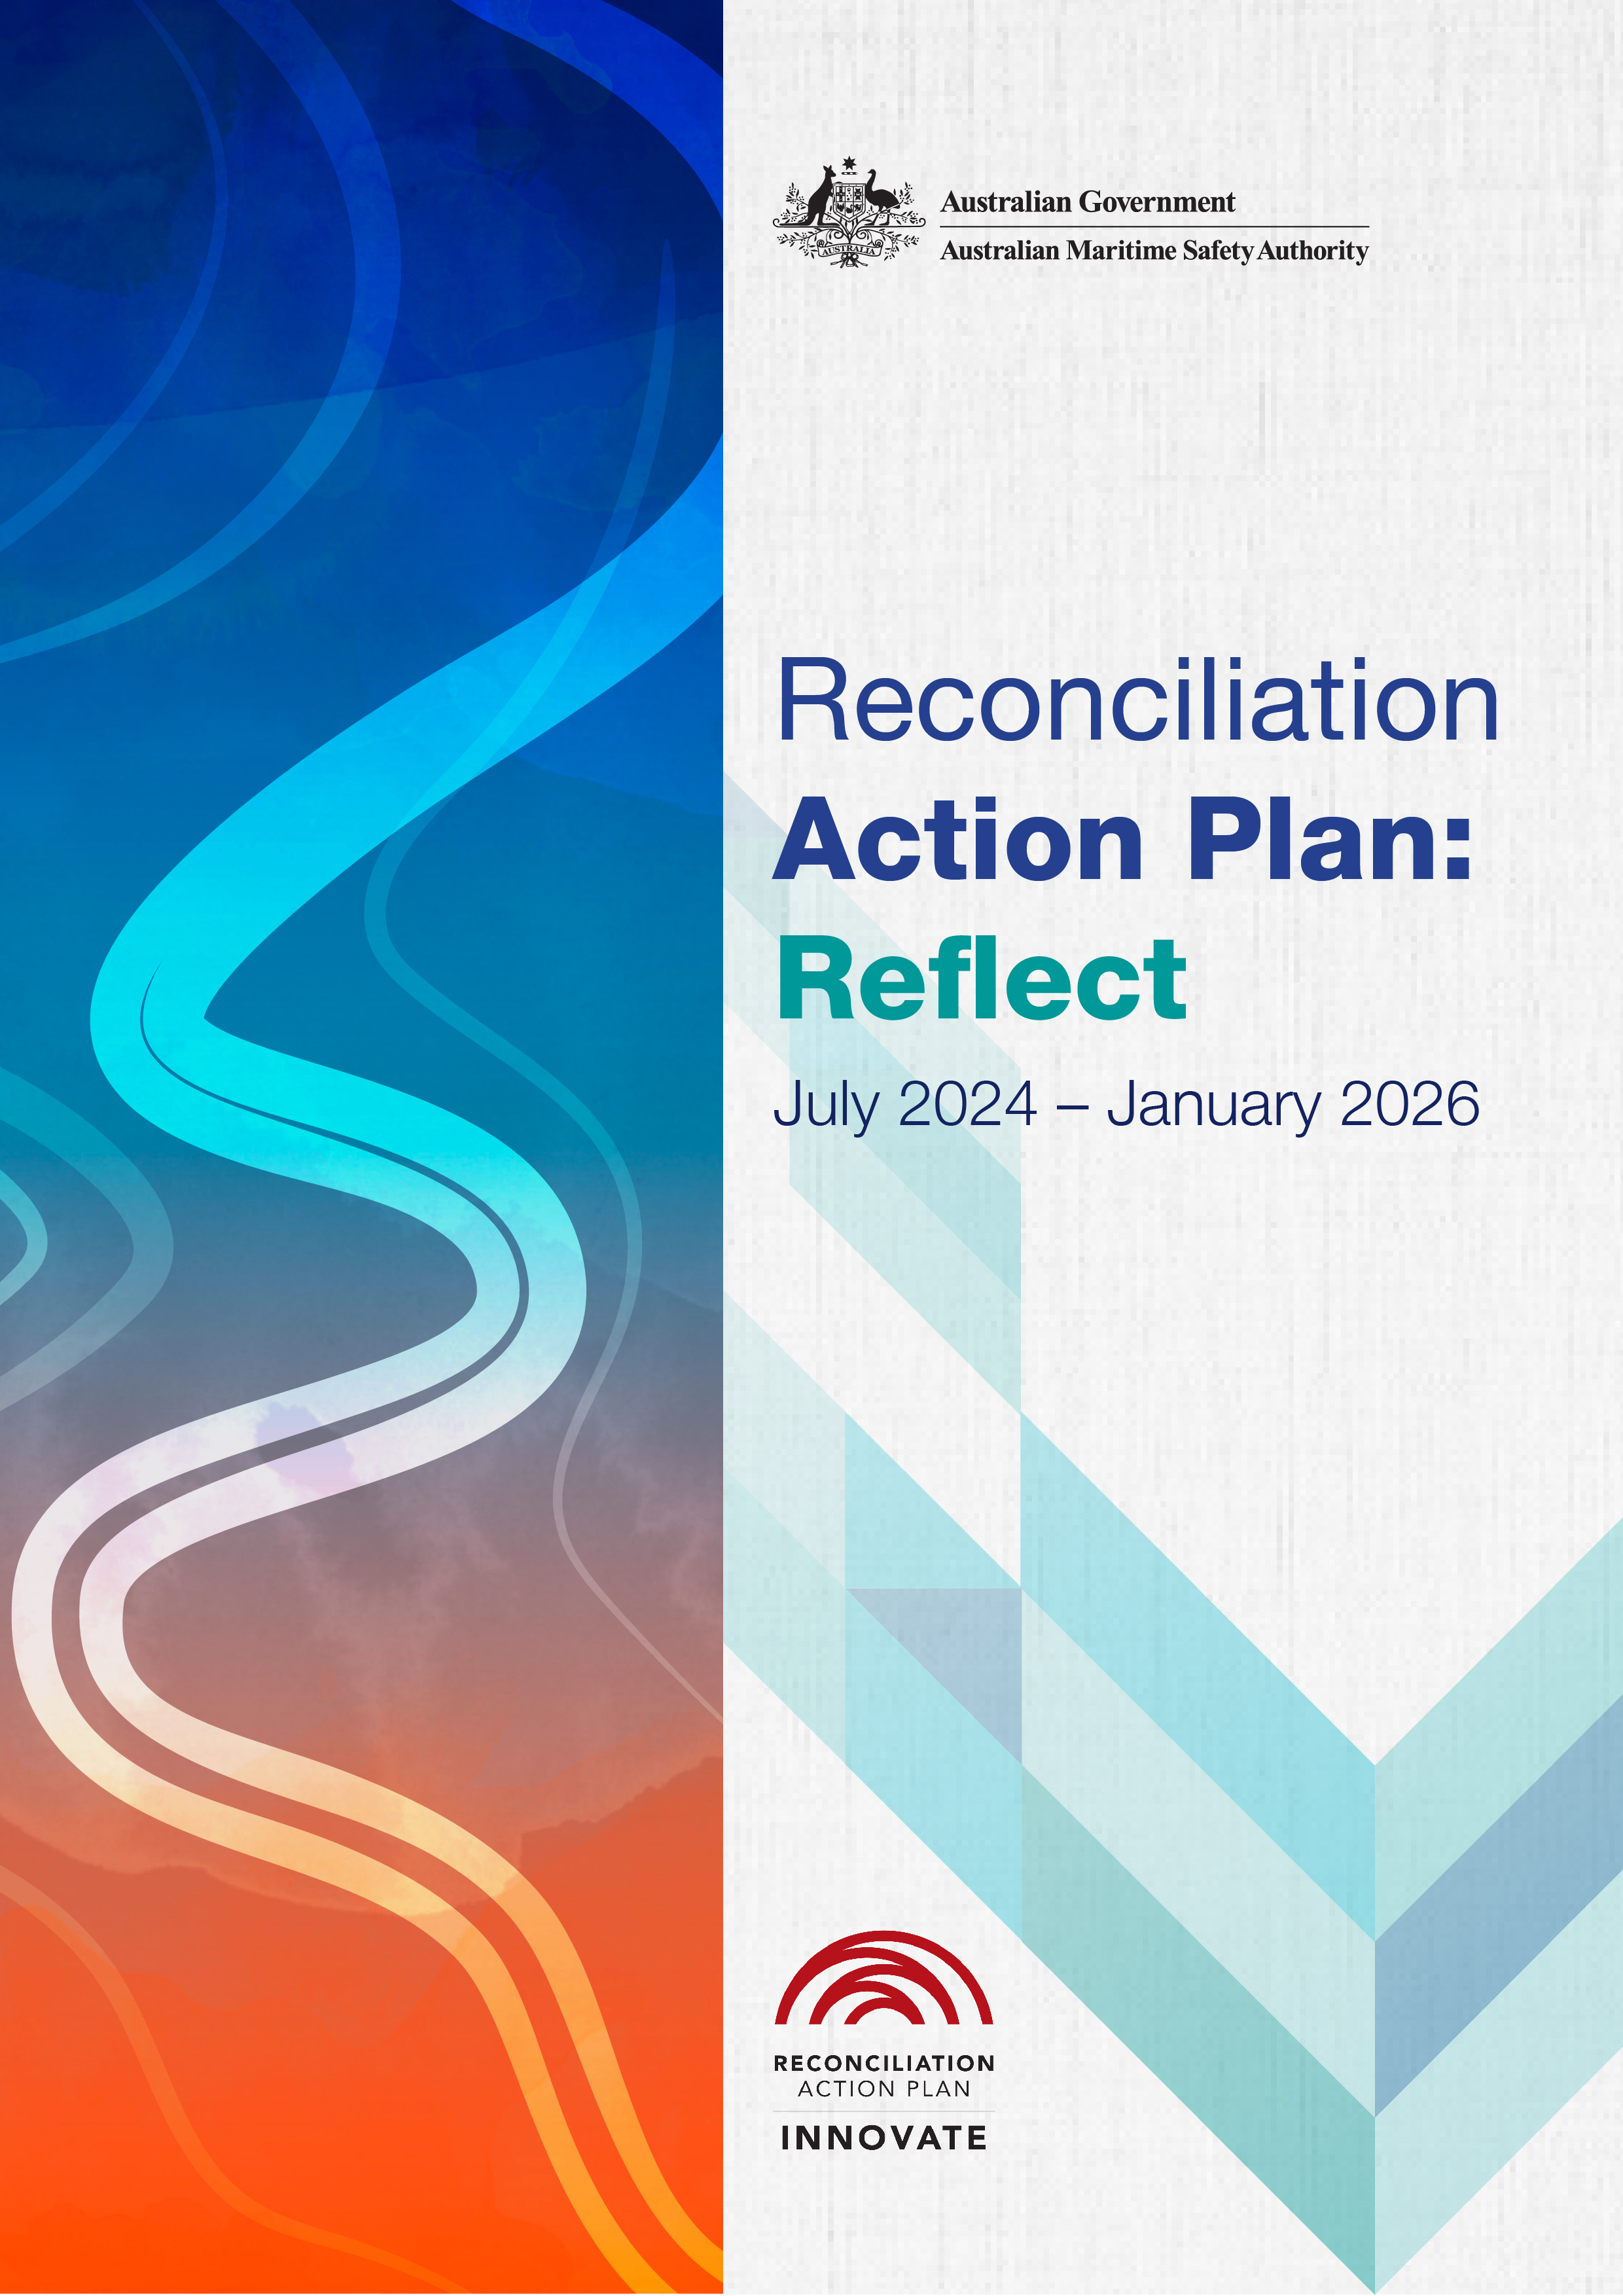 Cover page of AMSA's Reconciliation Action Plan: Reflect 